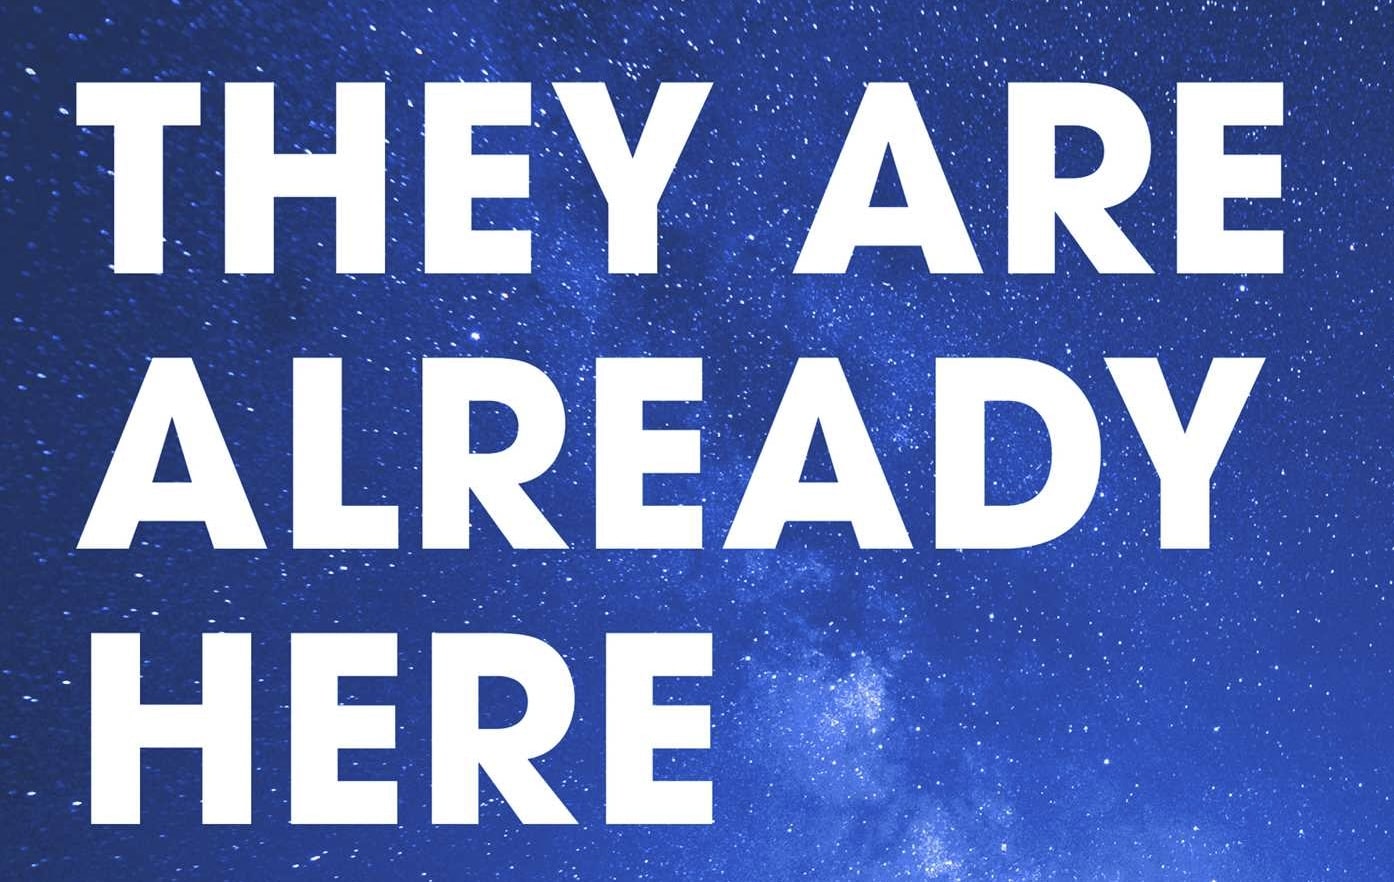 'They Are Already Here' looks at the sociology of UFO belief